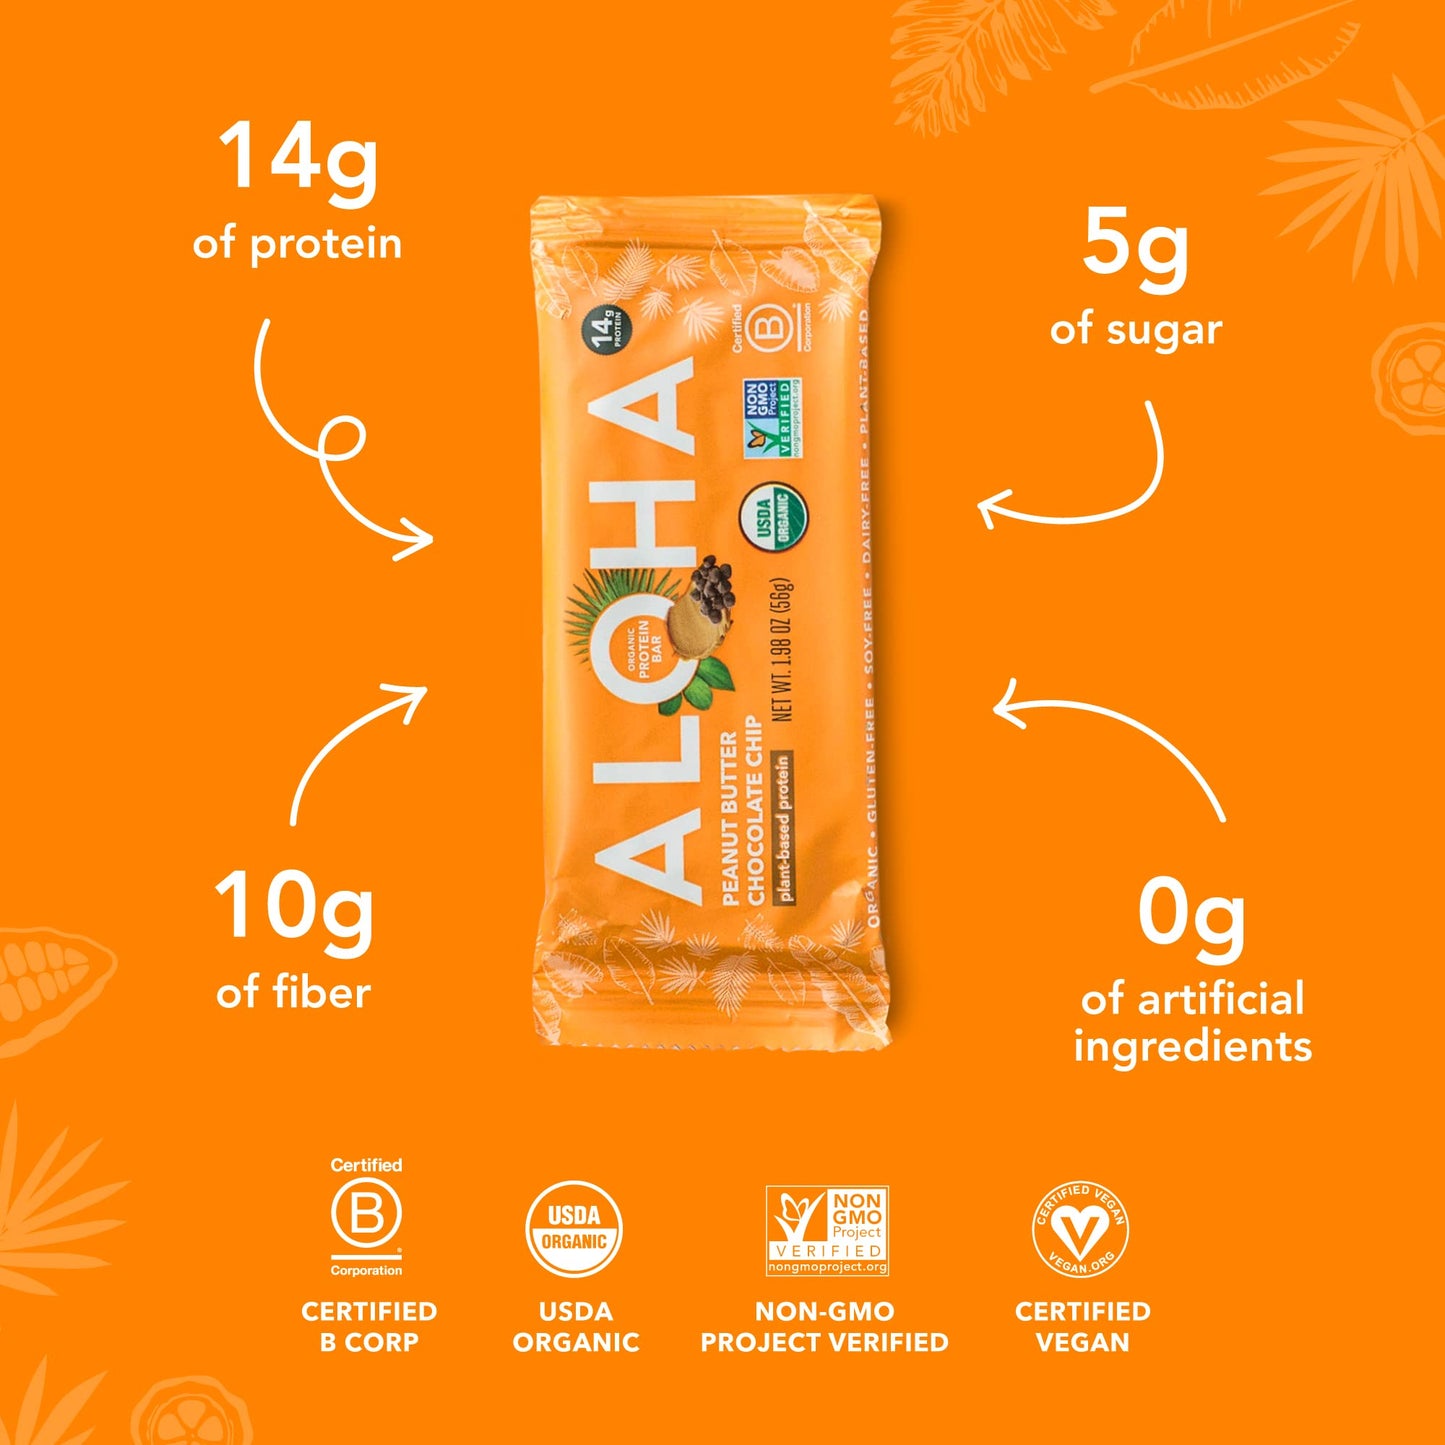 ALOHA Organic Plant Based Protein Bars |Peanut Butter Chocolate Chip | 1.98 Oz (Pack of 12) | Vegan, Low Sugar, Gluten Free, Paleo, Low Carb, Non-GMO, Stevia Free, Soy Free, No Sugar Alcohols